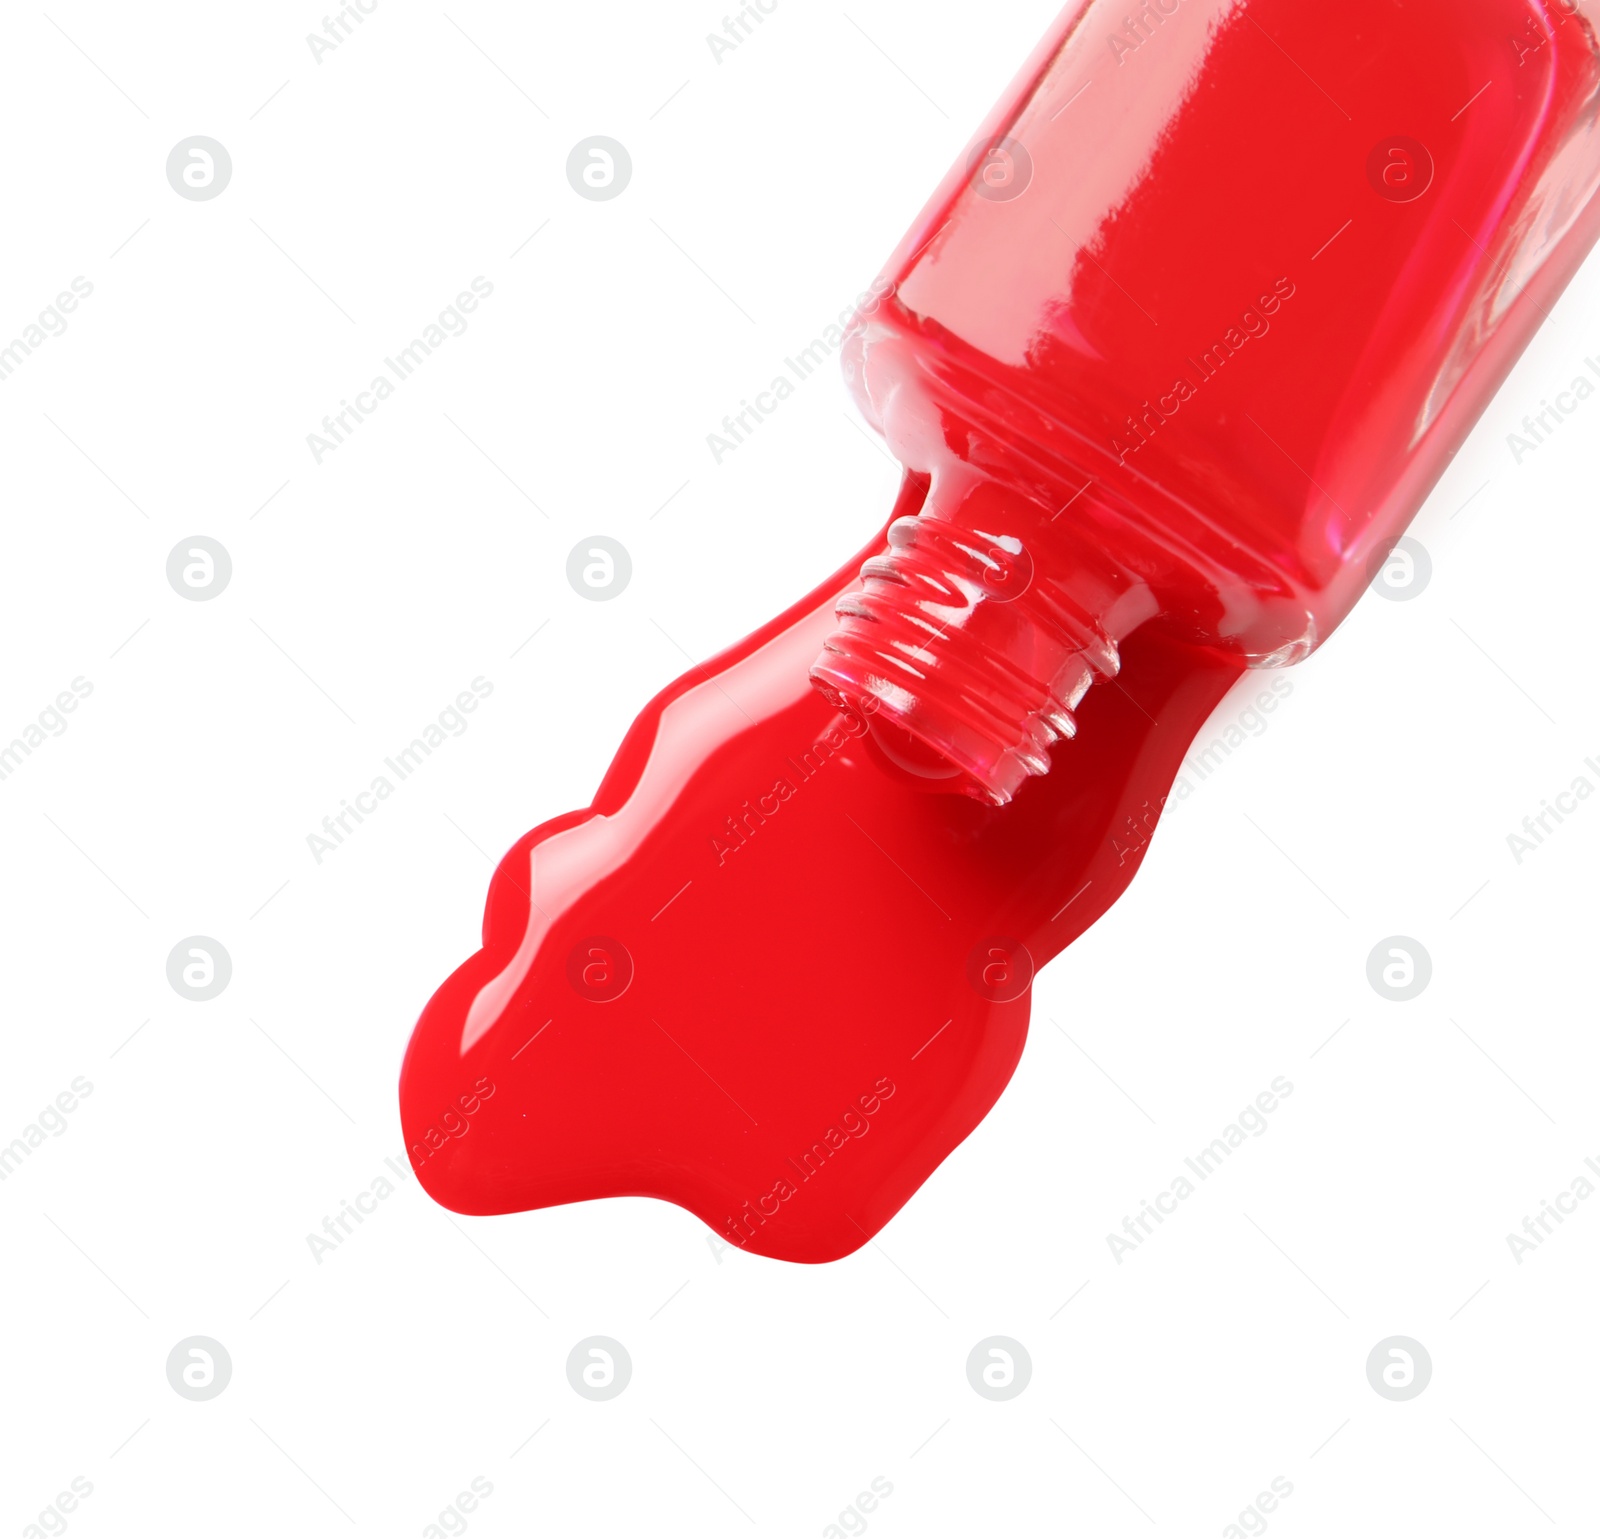 Photo of Spilled color nail polish with bottle on white background, top view